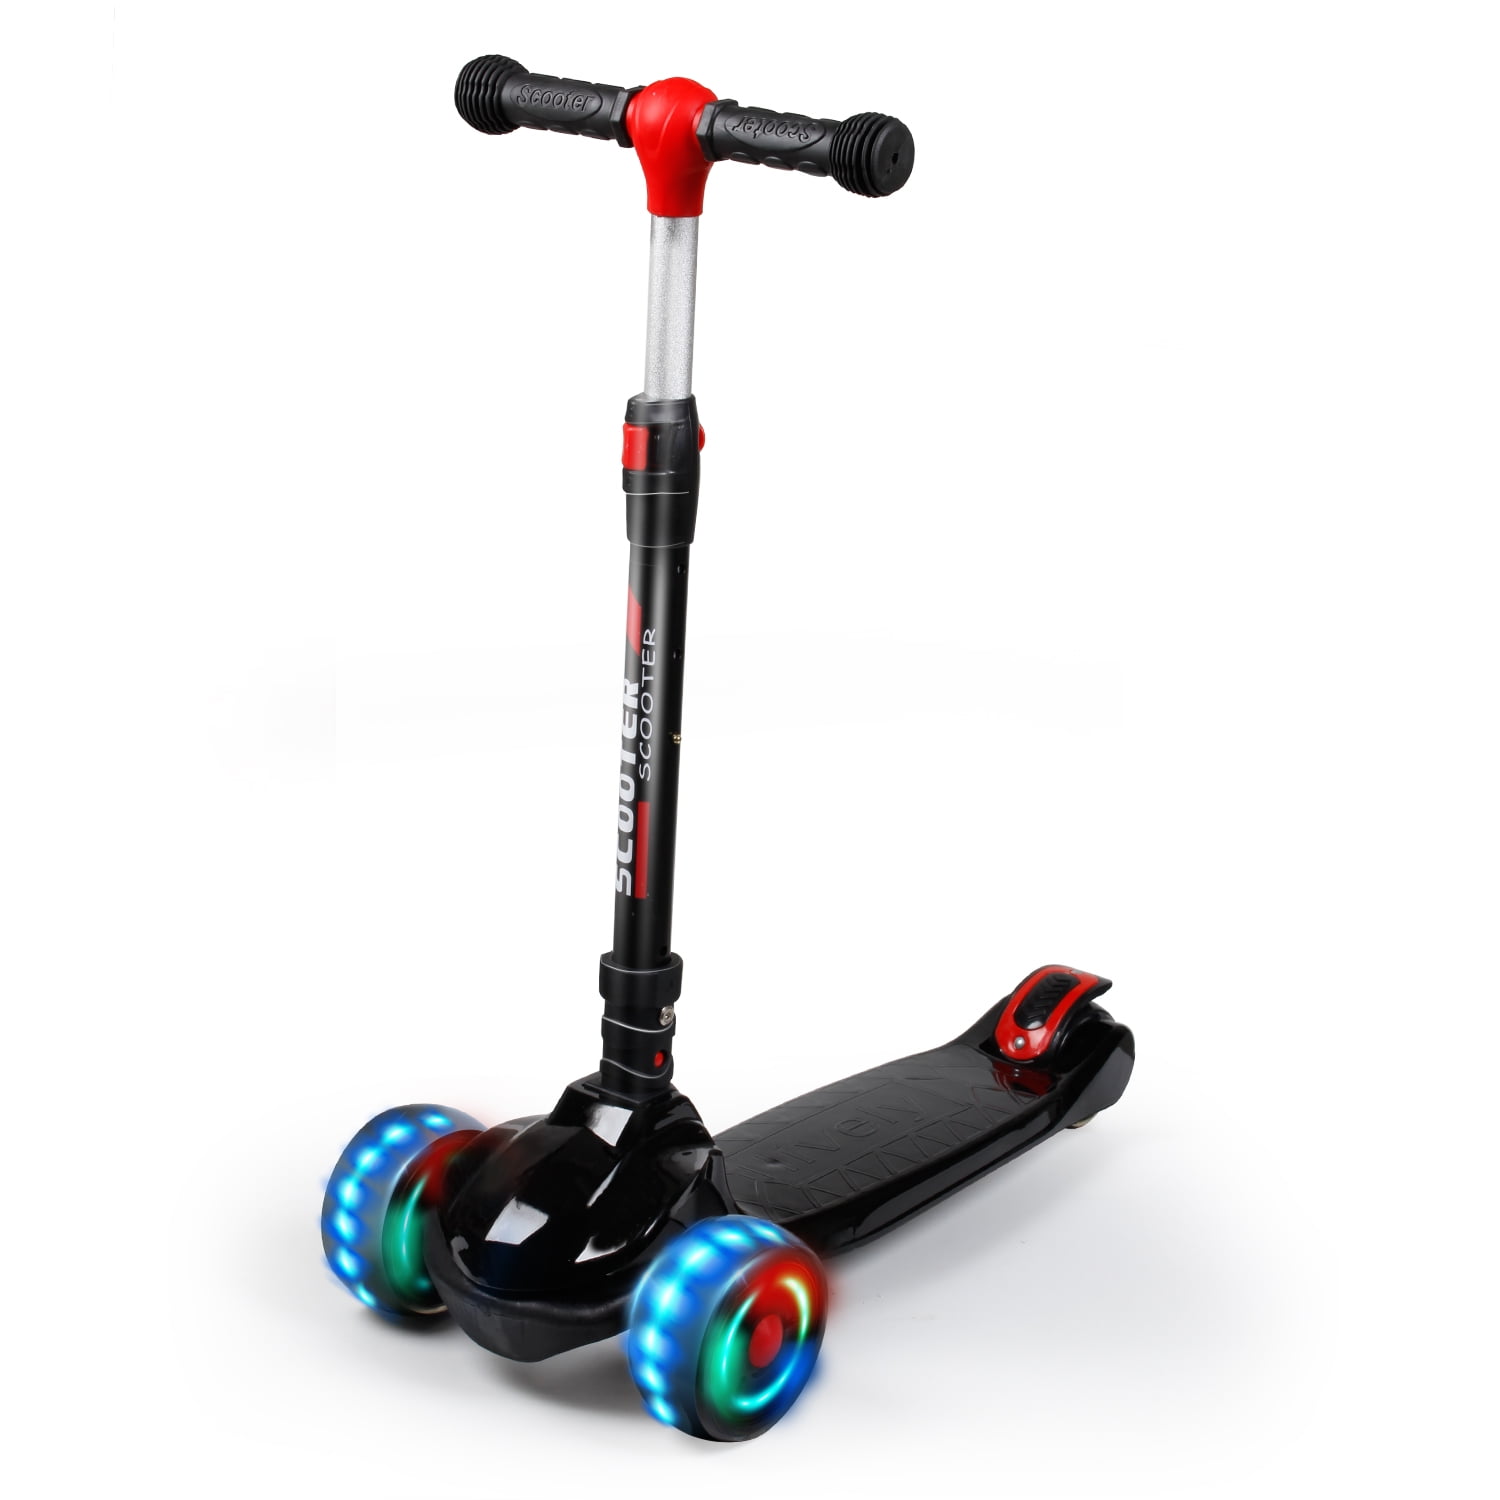 Flashing LED Lights Wheels Foldable & Height Adjustable Lean to Steer BOLDCUBE Kids Scooter 3 Wheel